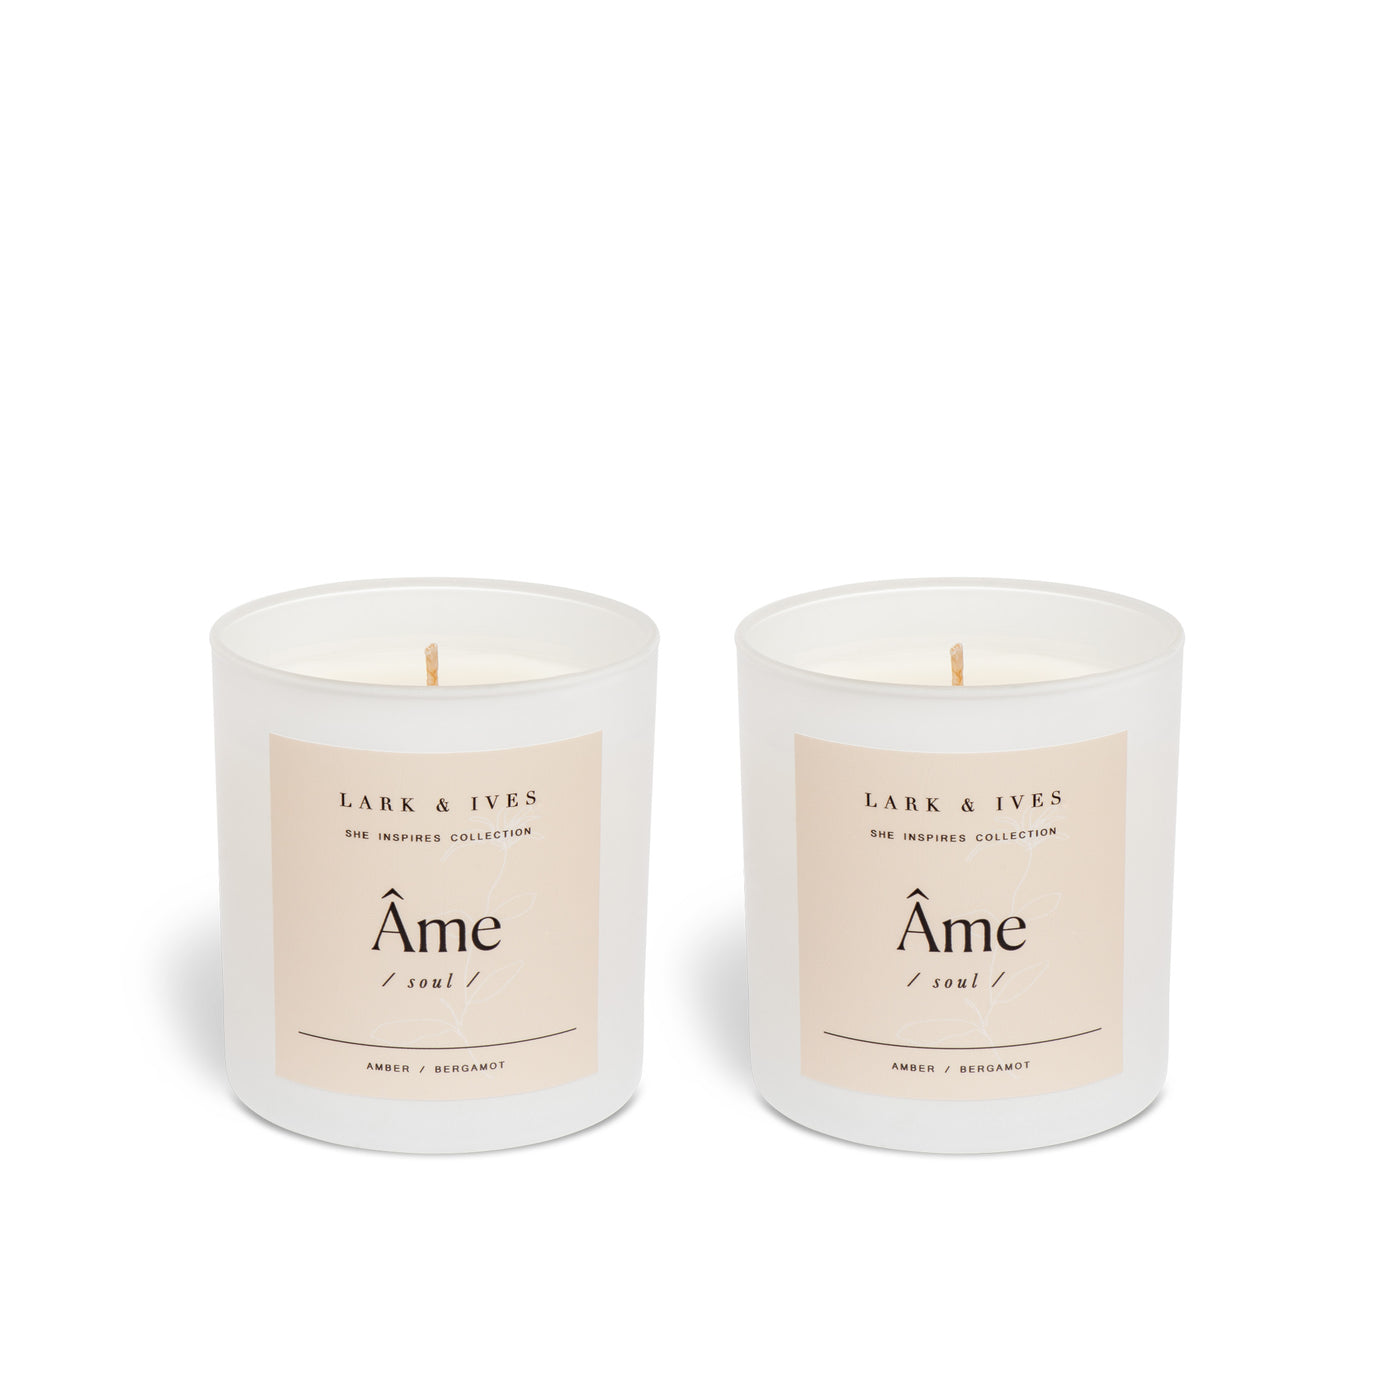 Lark and Ives / Candle / Soy Candle / Essential Oil Candle / Cruelty Free / Fair Trade / Ethical Goods / Set of two candles / Gift Guide / Gift Ideas / Ame and Ame